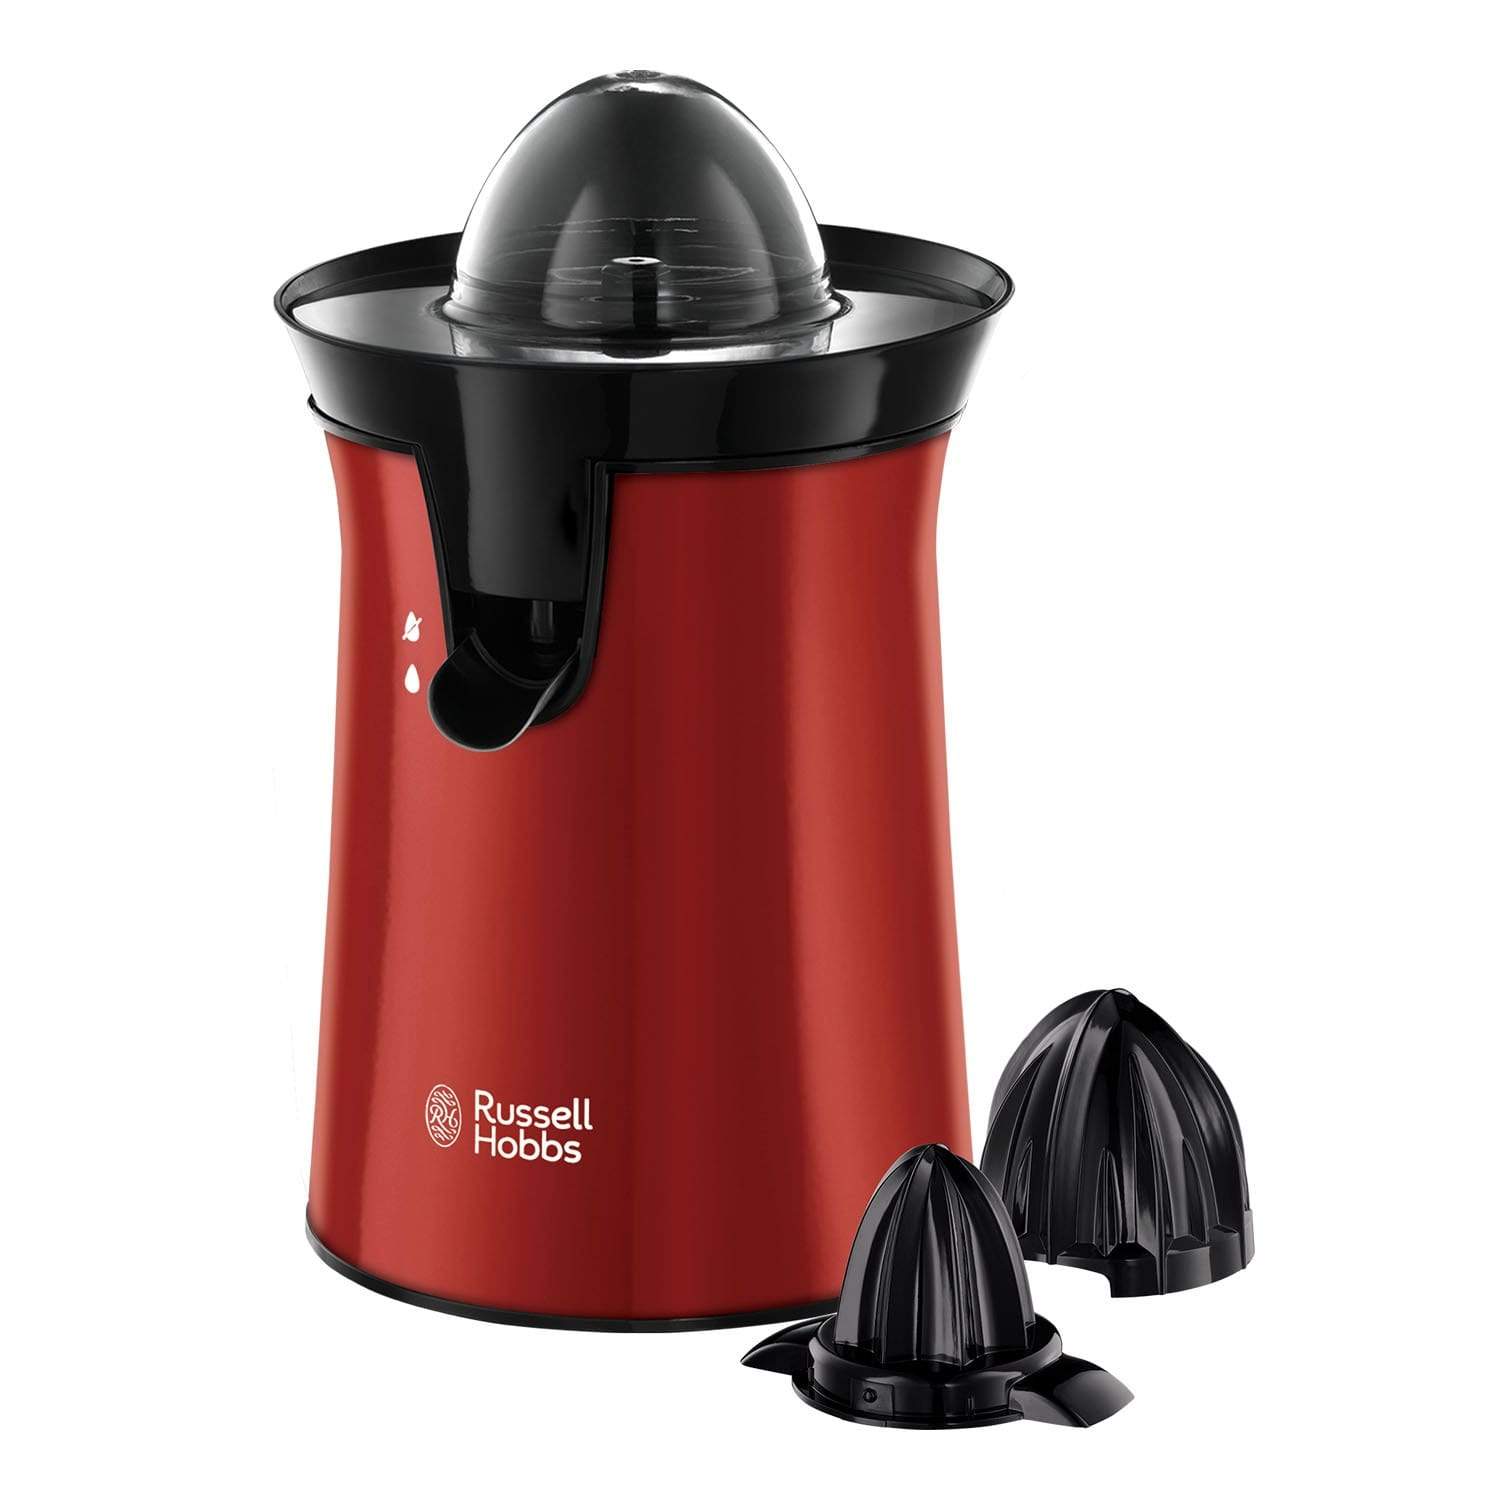 RUSSELL HOBBS COLOUR PLUS+ FLAME RED CITRUS PRESS - 26010-56